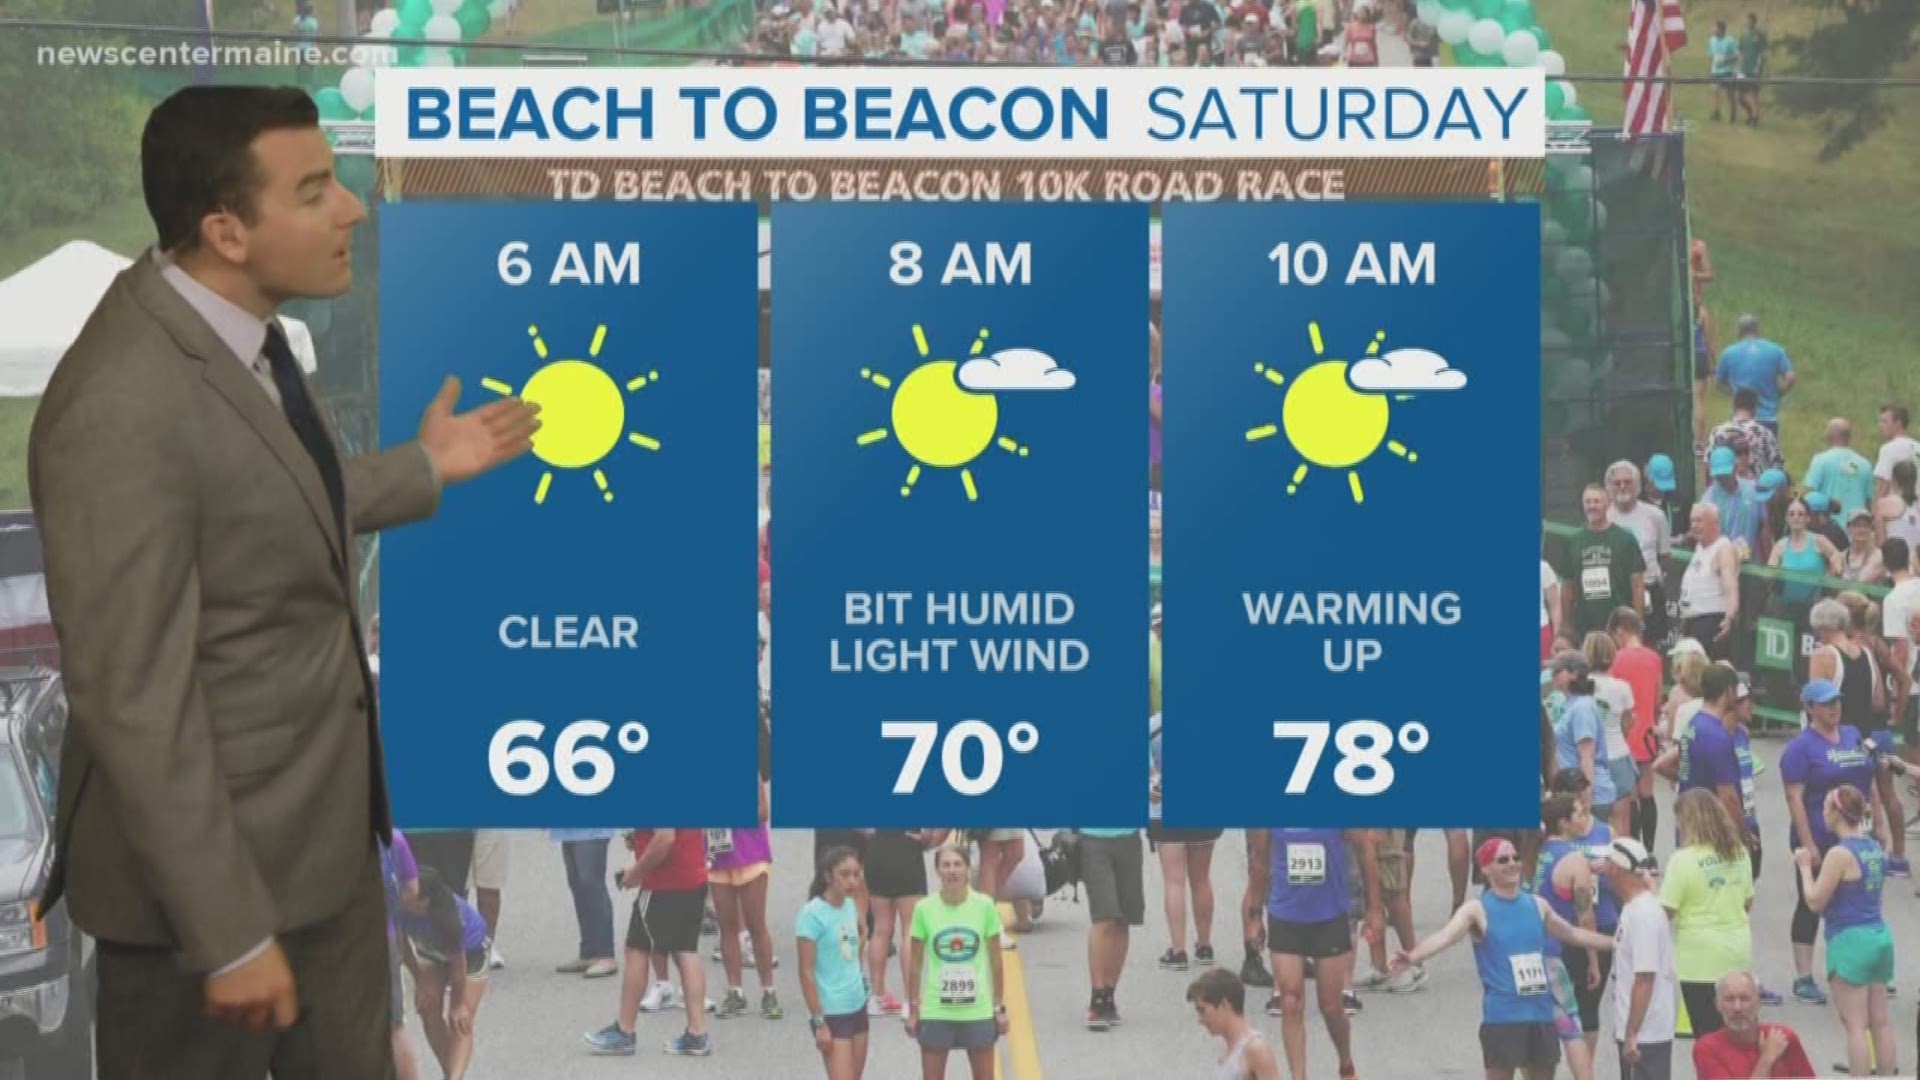 Meteorologist Ryan Breton says that for most runners, it will feel hot during the second part of the race.